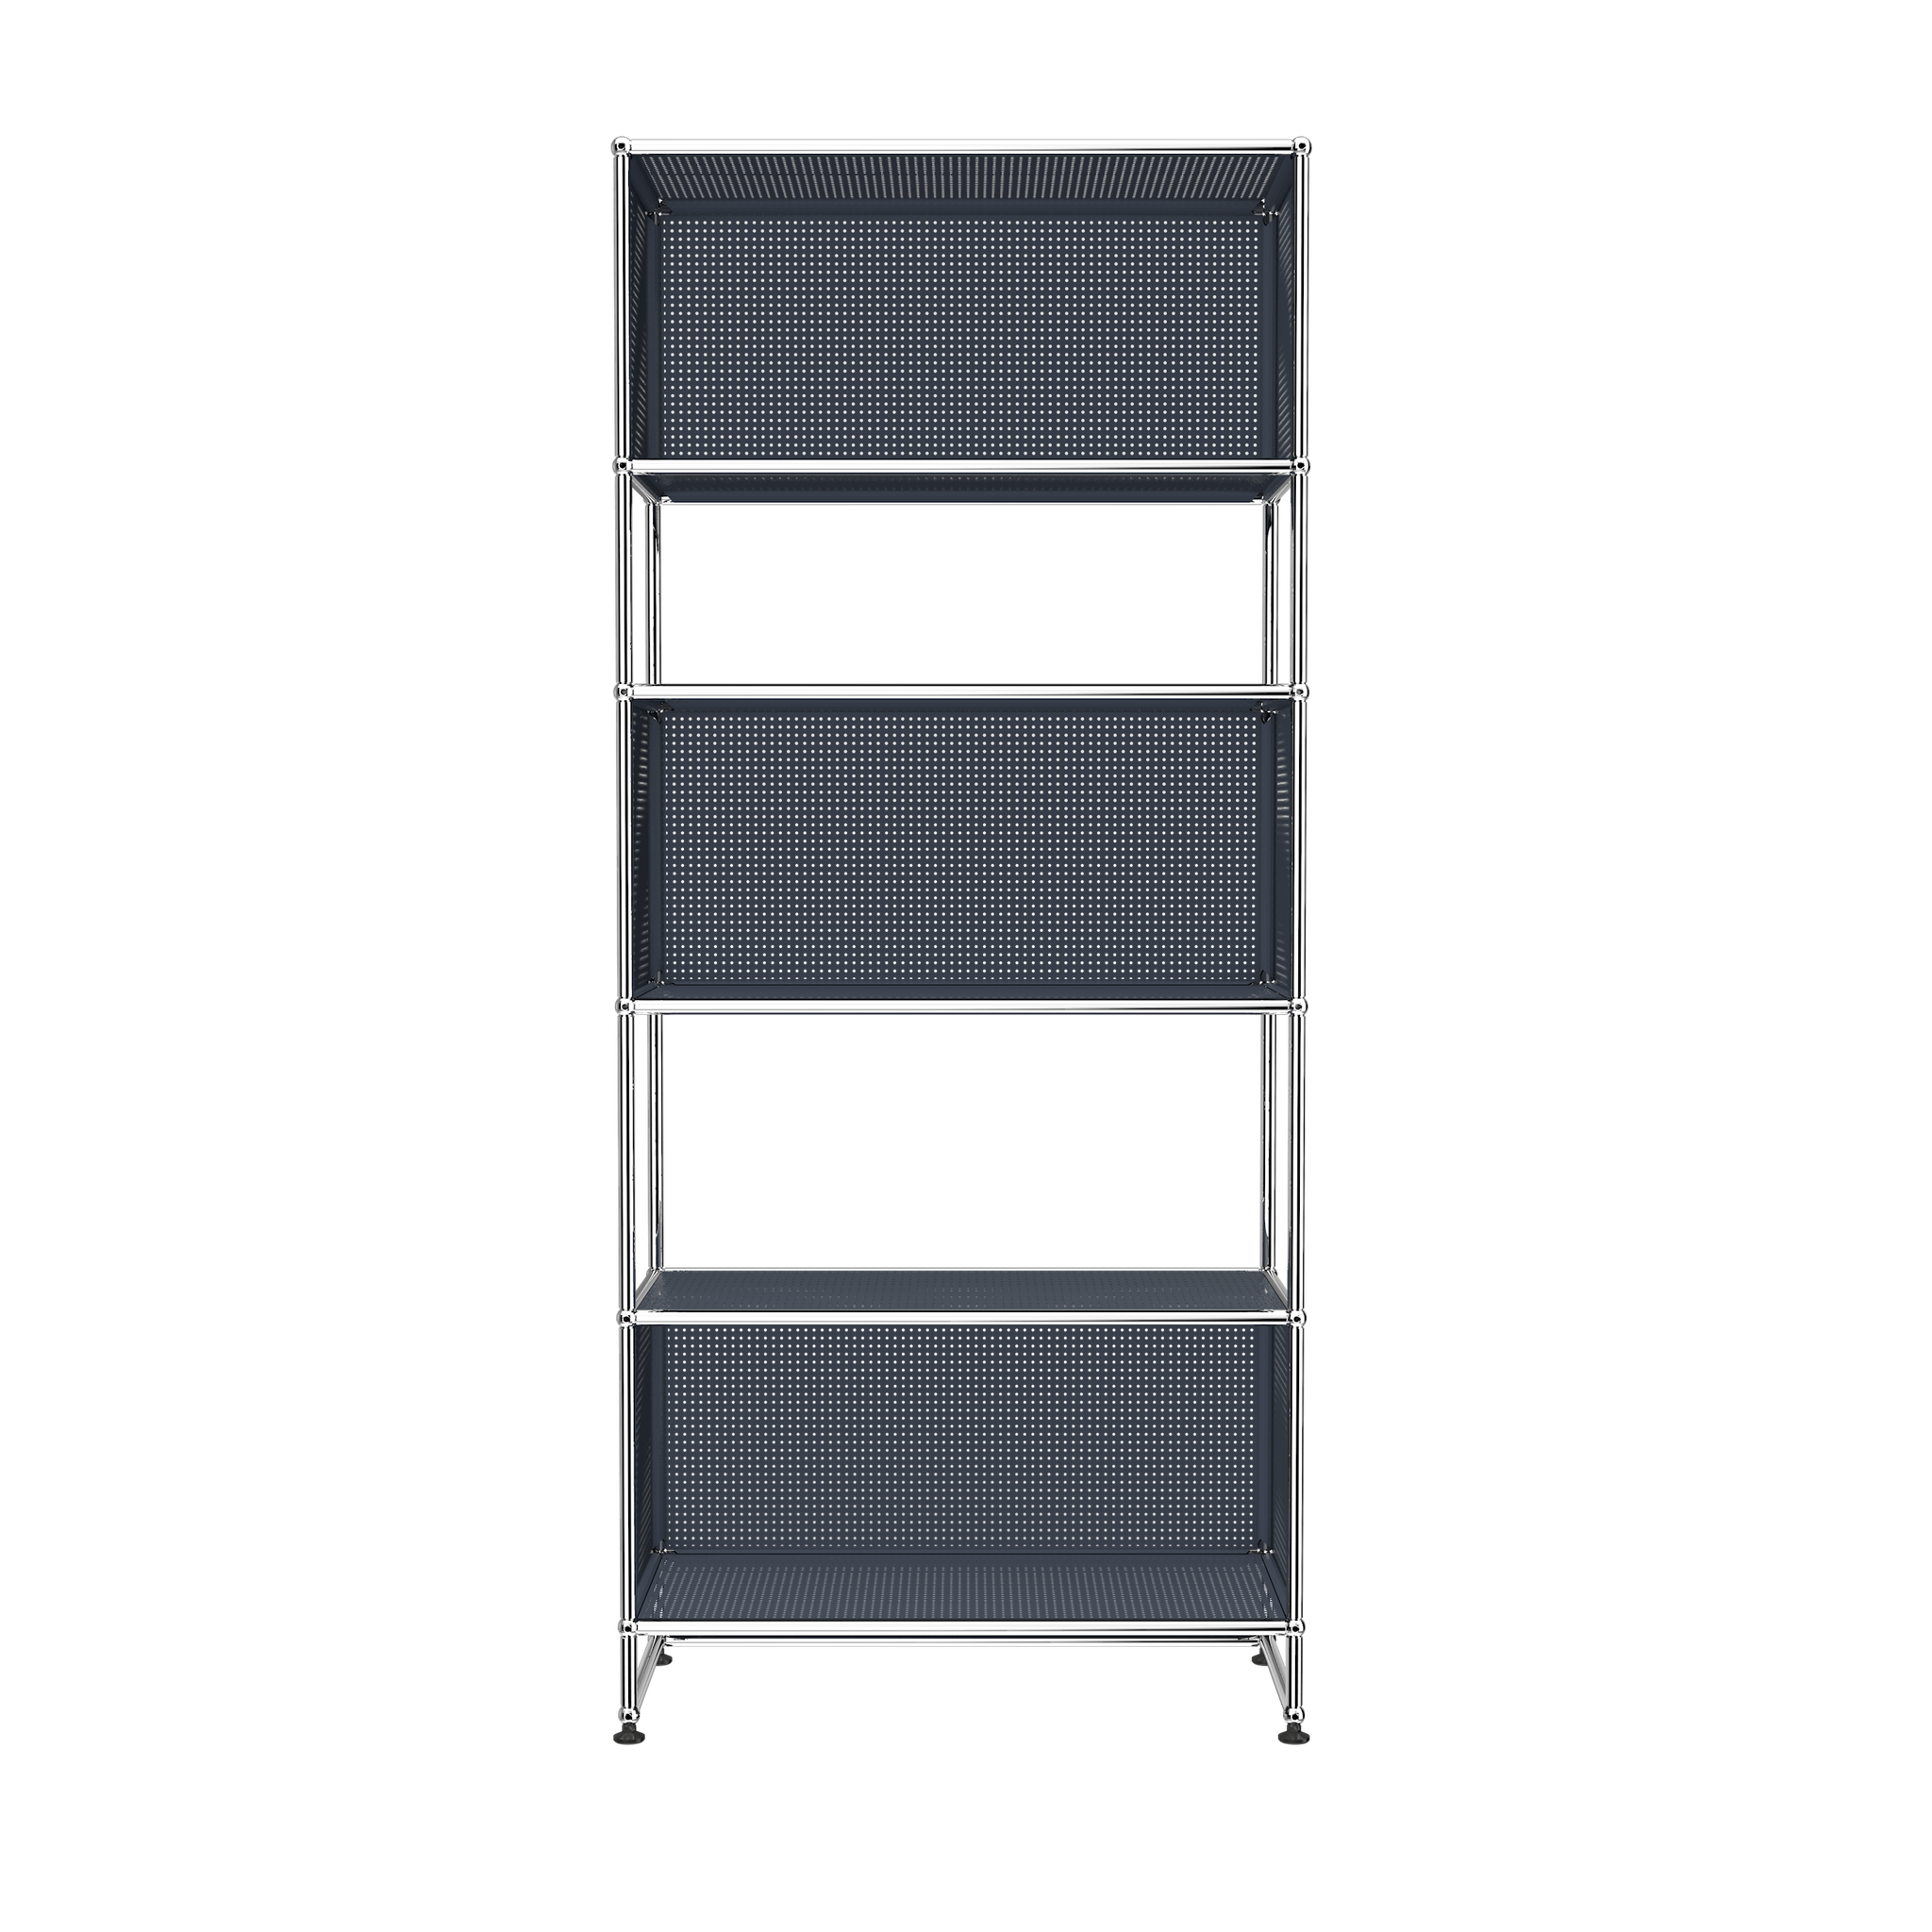 USM Haller 3 Box Shelving with Perforated Panels (RE119) in Anthracite